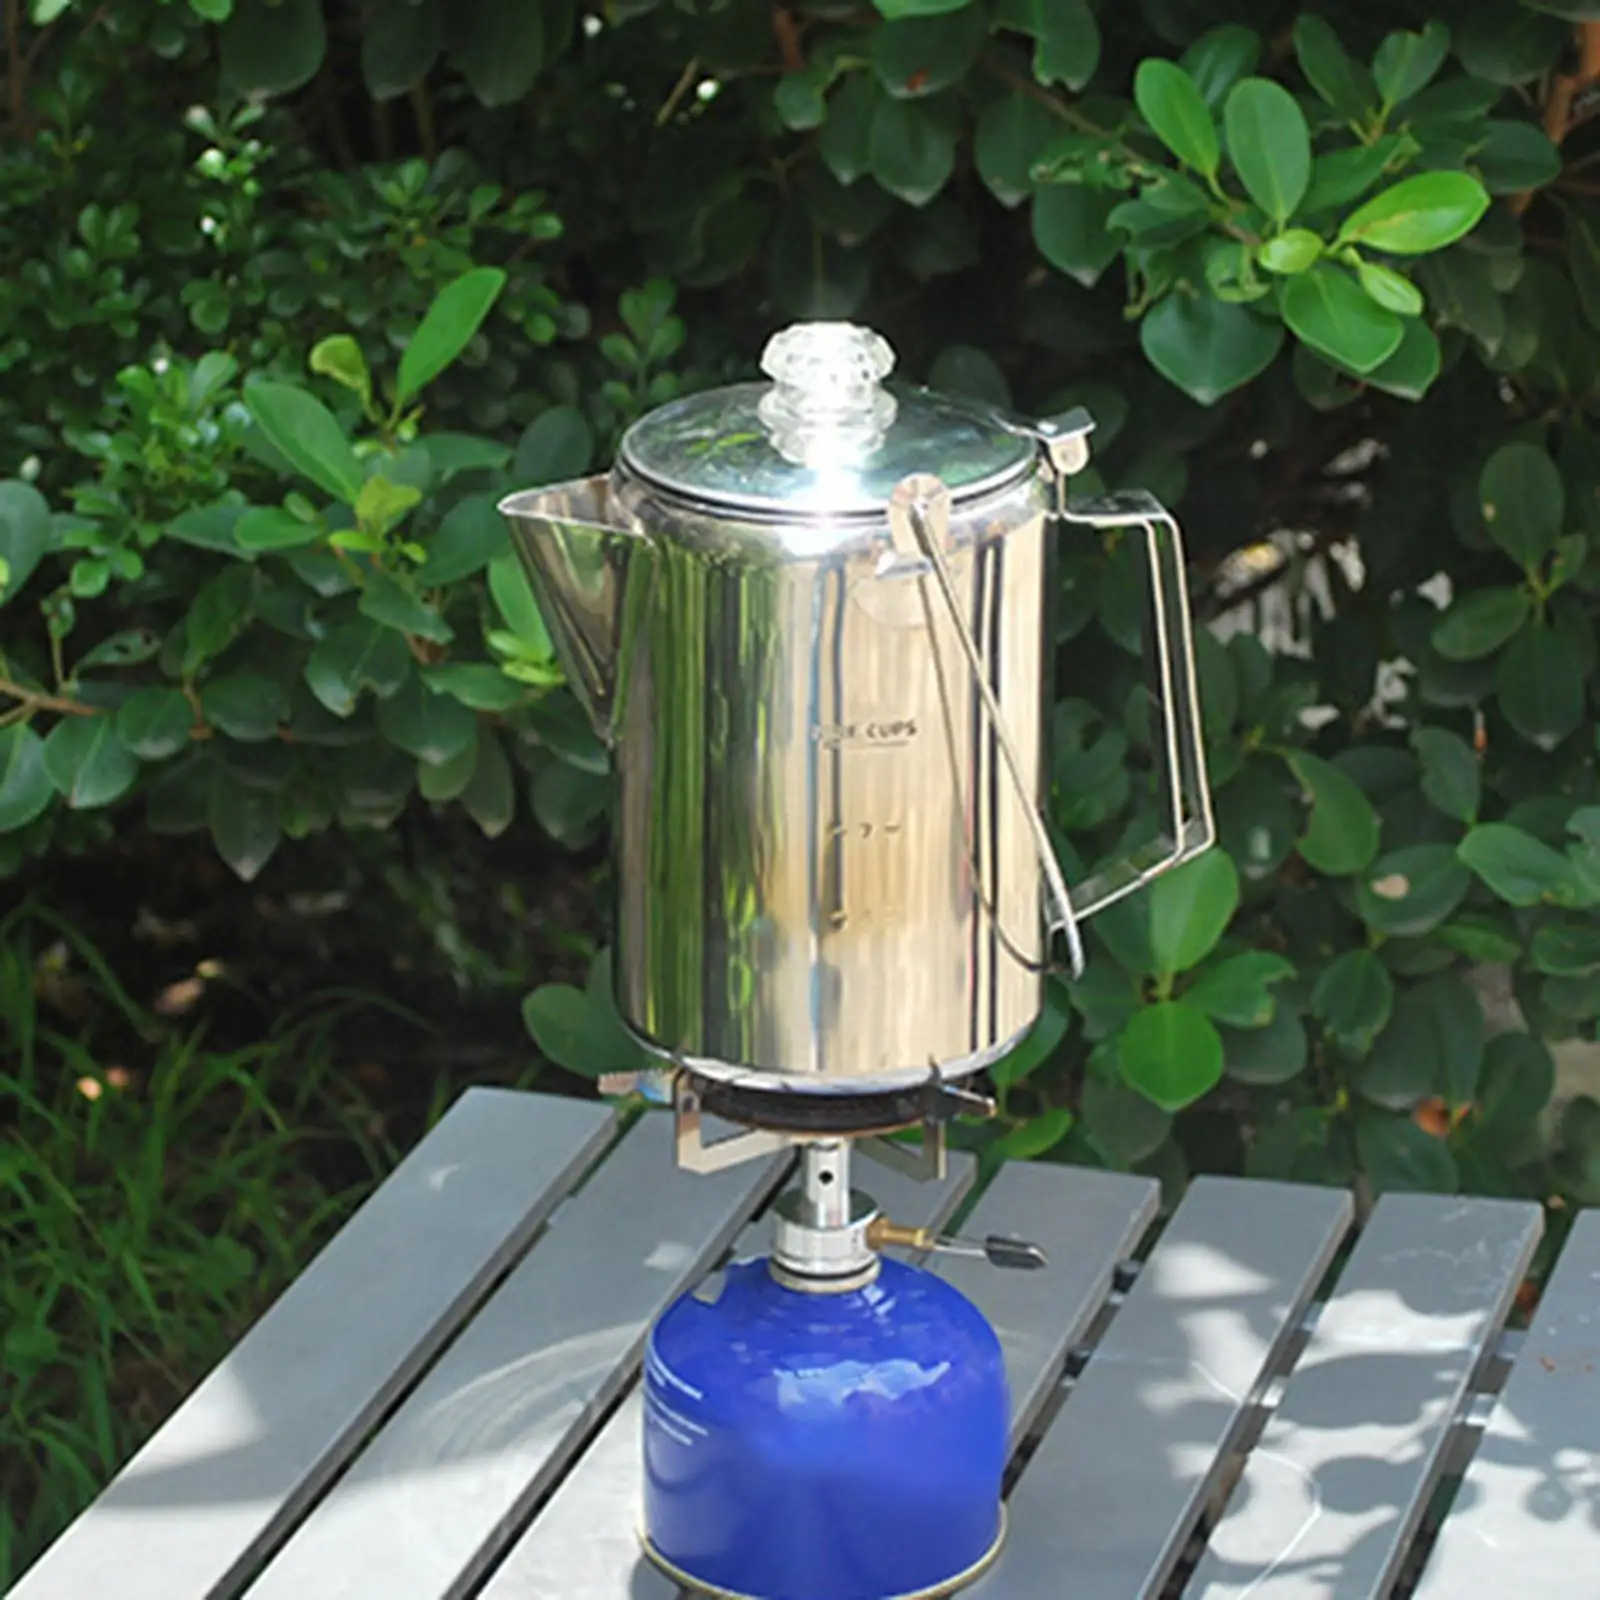 Stainless Steel 9 Cups Percolator Coffee Maker for Outdoor Camping